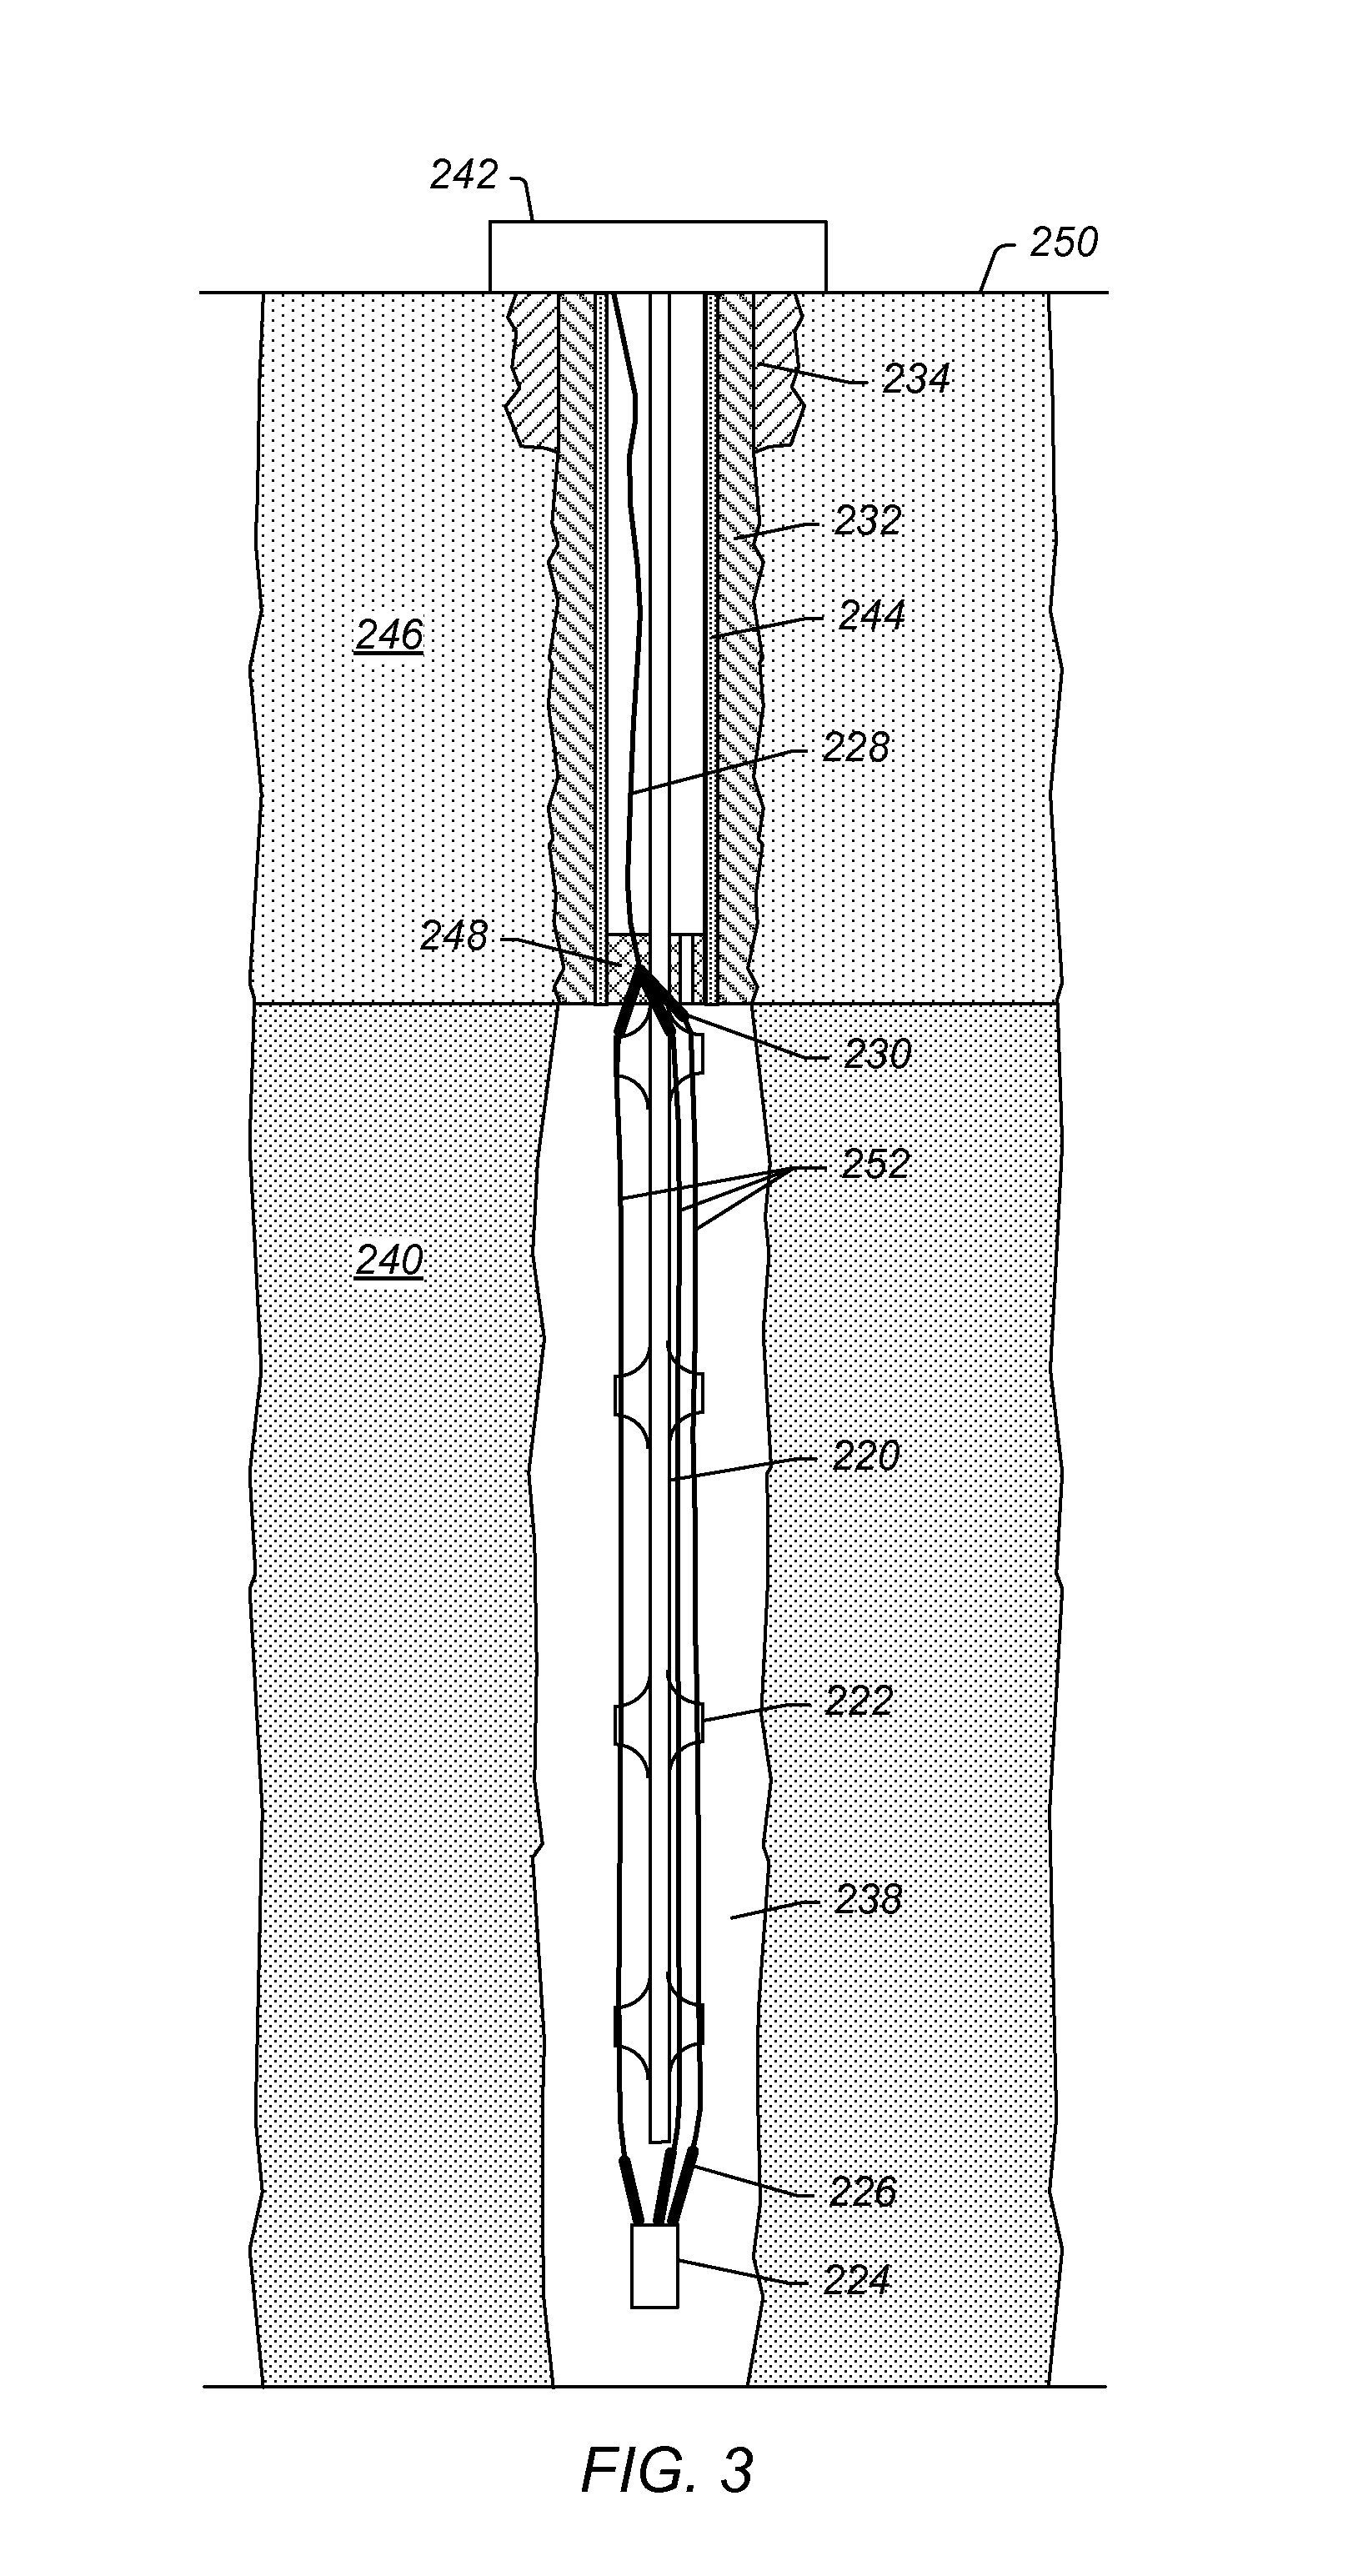 Insulating blocks and methods for installation in insulated conductor heaters